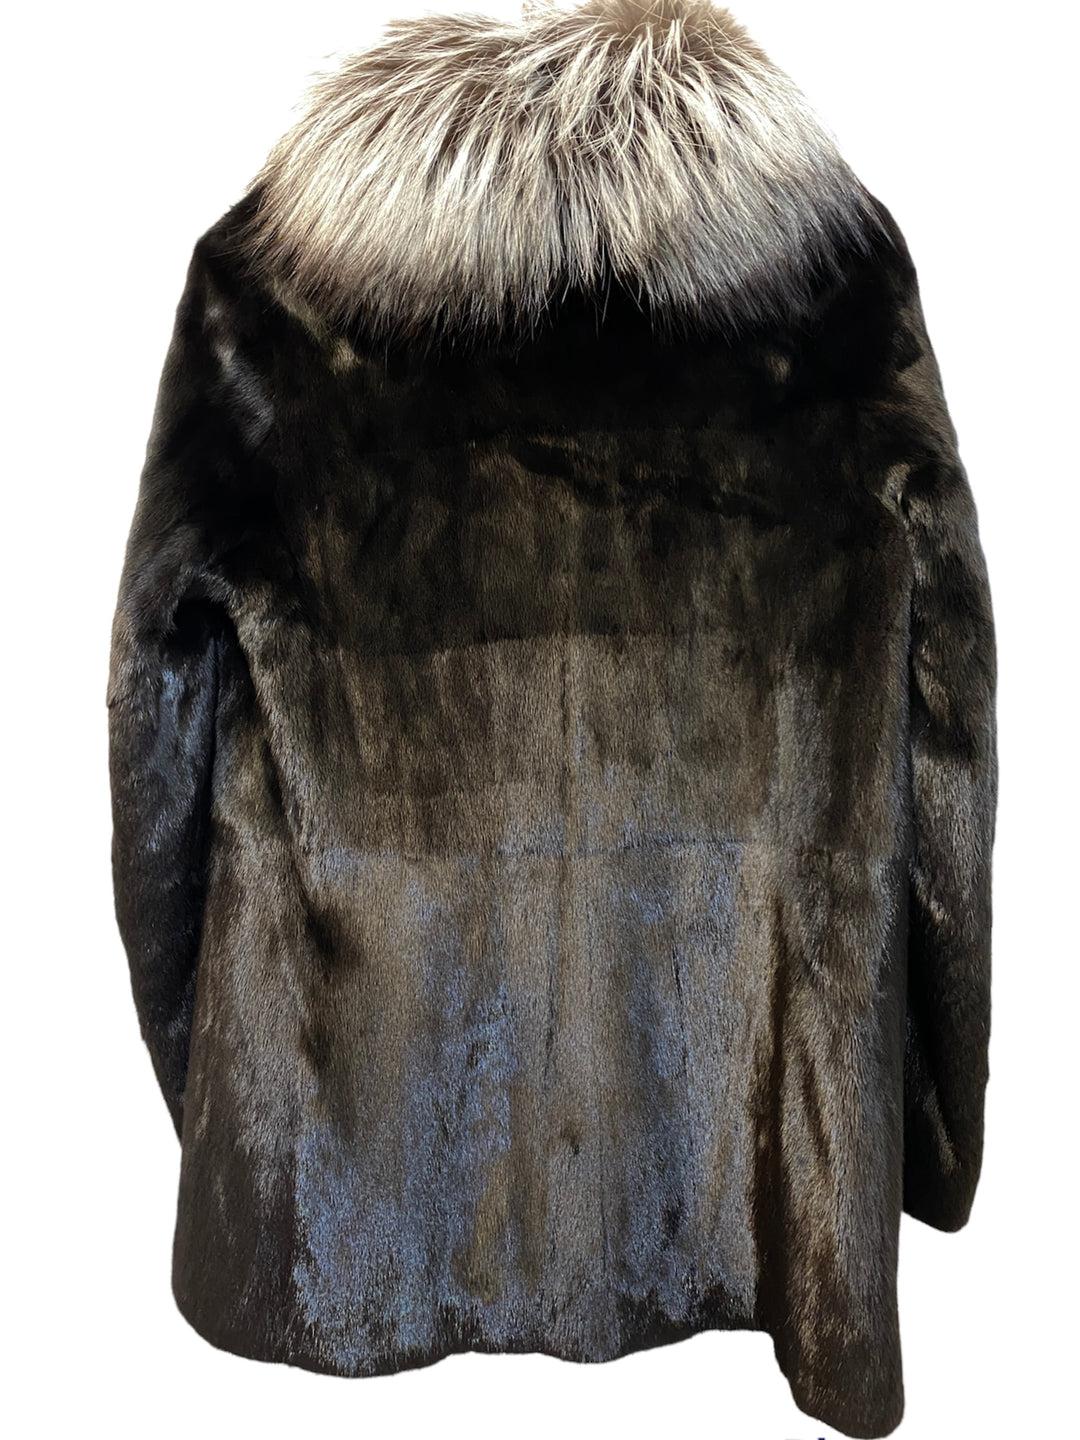 Christian Dior Mink Coat

Condition: Very excellent
Colour:  black
Size: 38
Material: 100% mink, 100% fox fur on collar

This Christian Dior mink coat is a stunning and elegant piece that is perfect for any occasion. Made from high-quality mink fur,